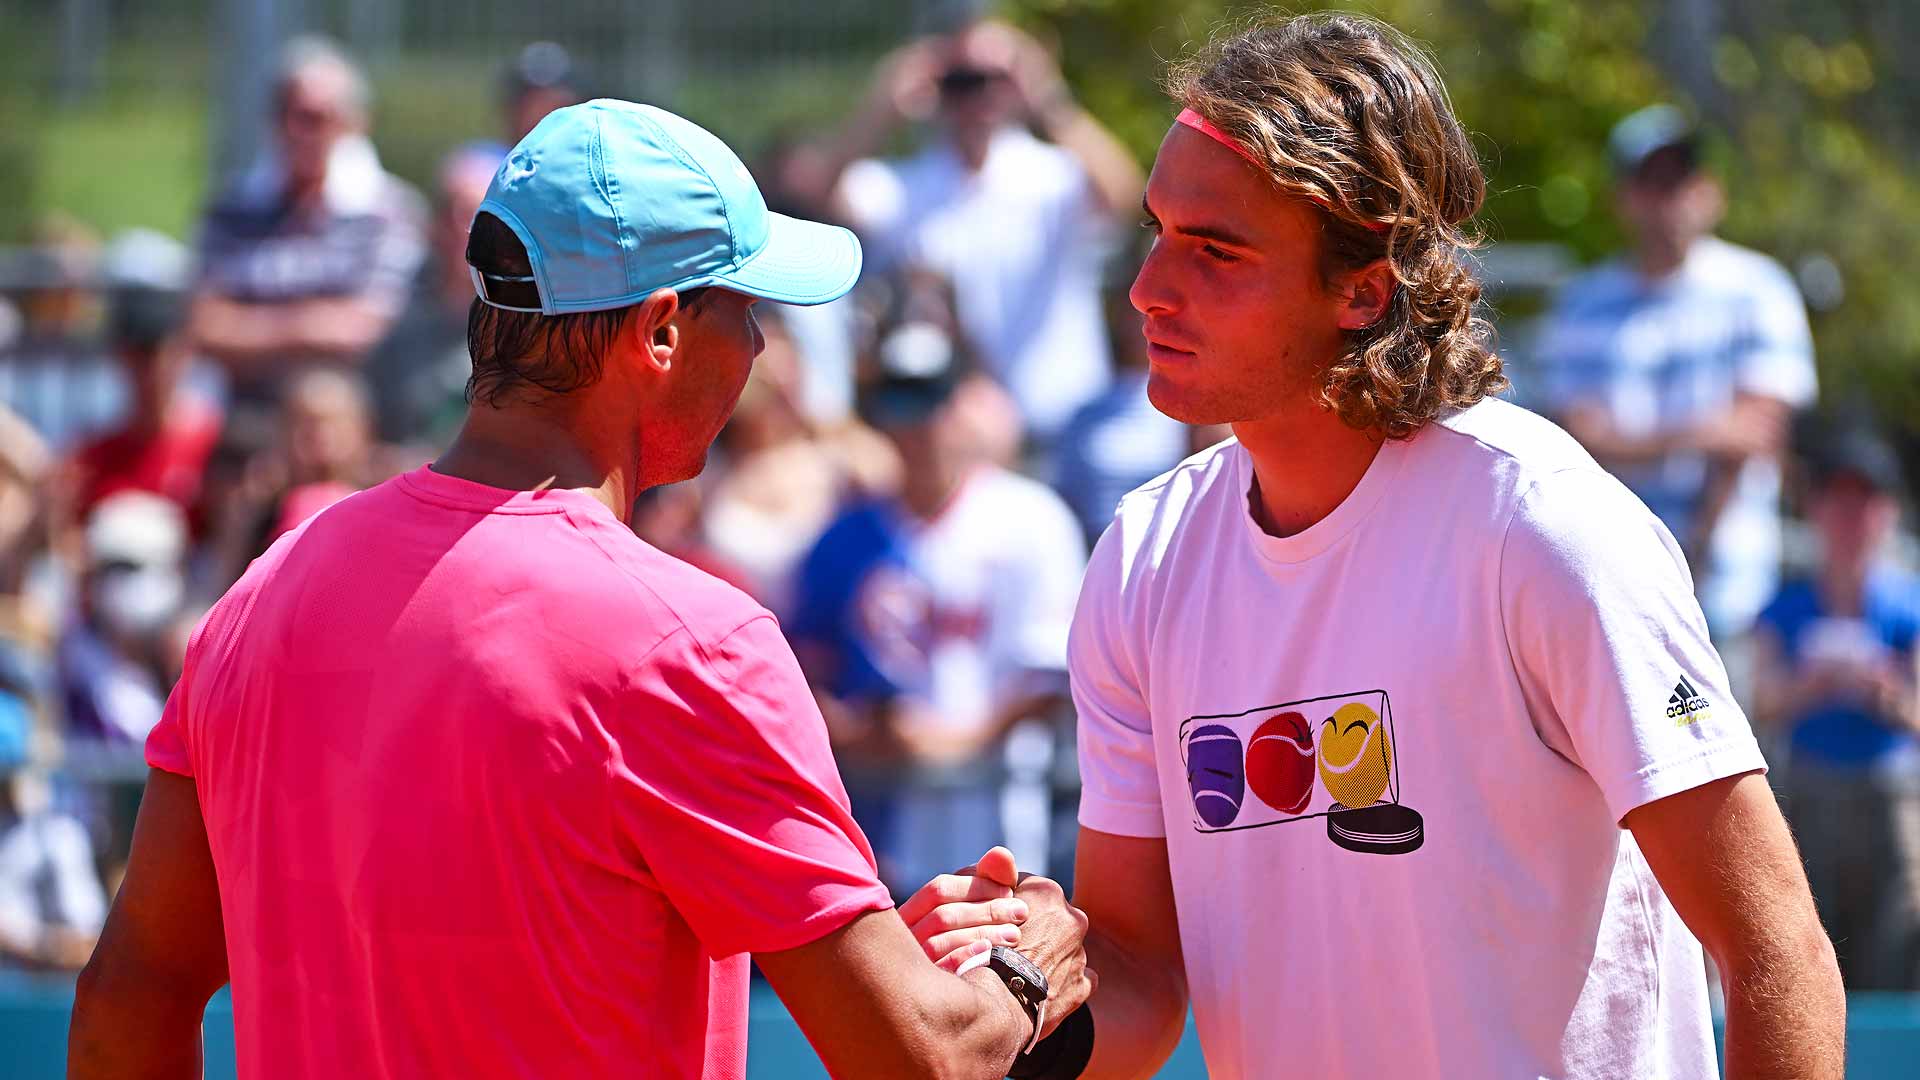 Rafael Nadal and Stefanos Tsitsipas have played nine matches in their Lexus ATP Head2Head series (Nadal leads 7-2).